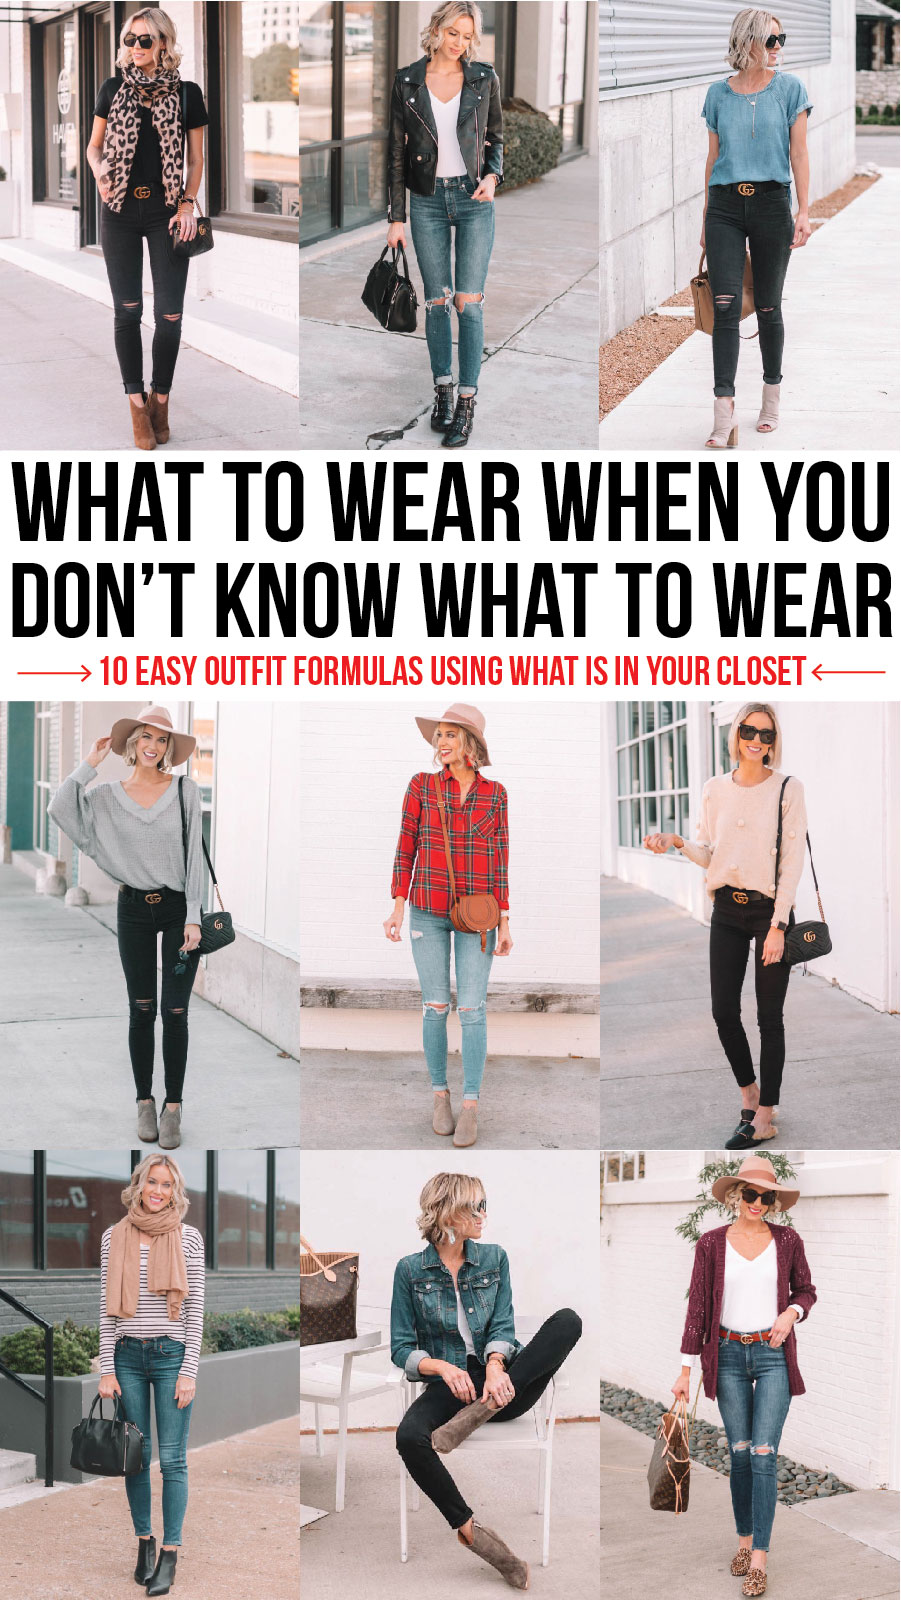 What to Wear When You Don't Know What to Wear - 10 Easy Outfit